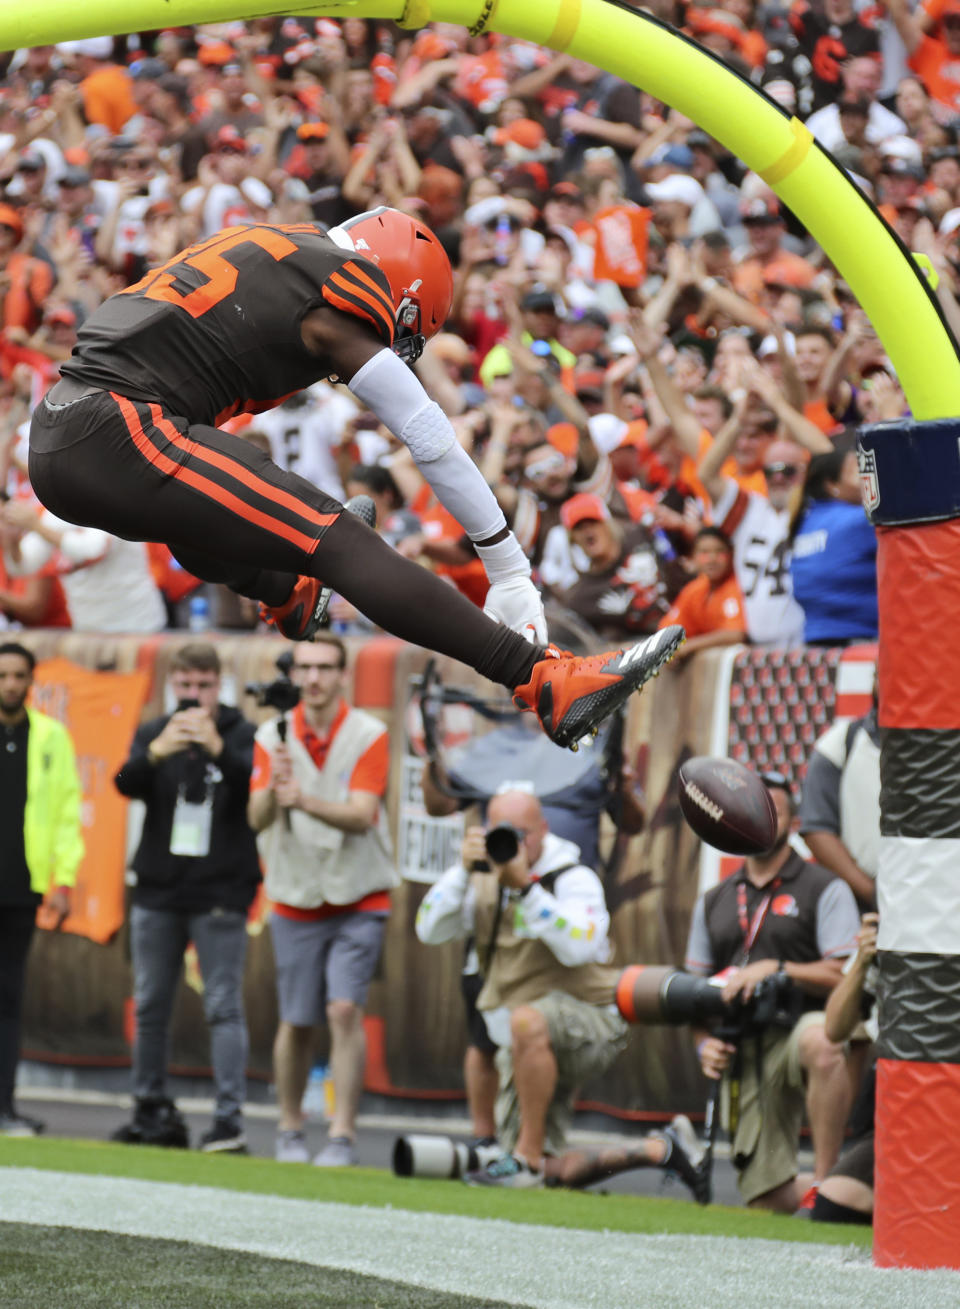 Cleveland Browns tight end David Njoku celebrates after scoring a 3-yard touchdown during the second half in an NFL football game against the Tennessee Titans, Sunday, Sept. 8, 2019, in Cleveland. (AP Photo/Ron Schwane)